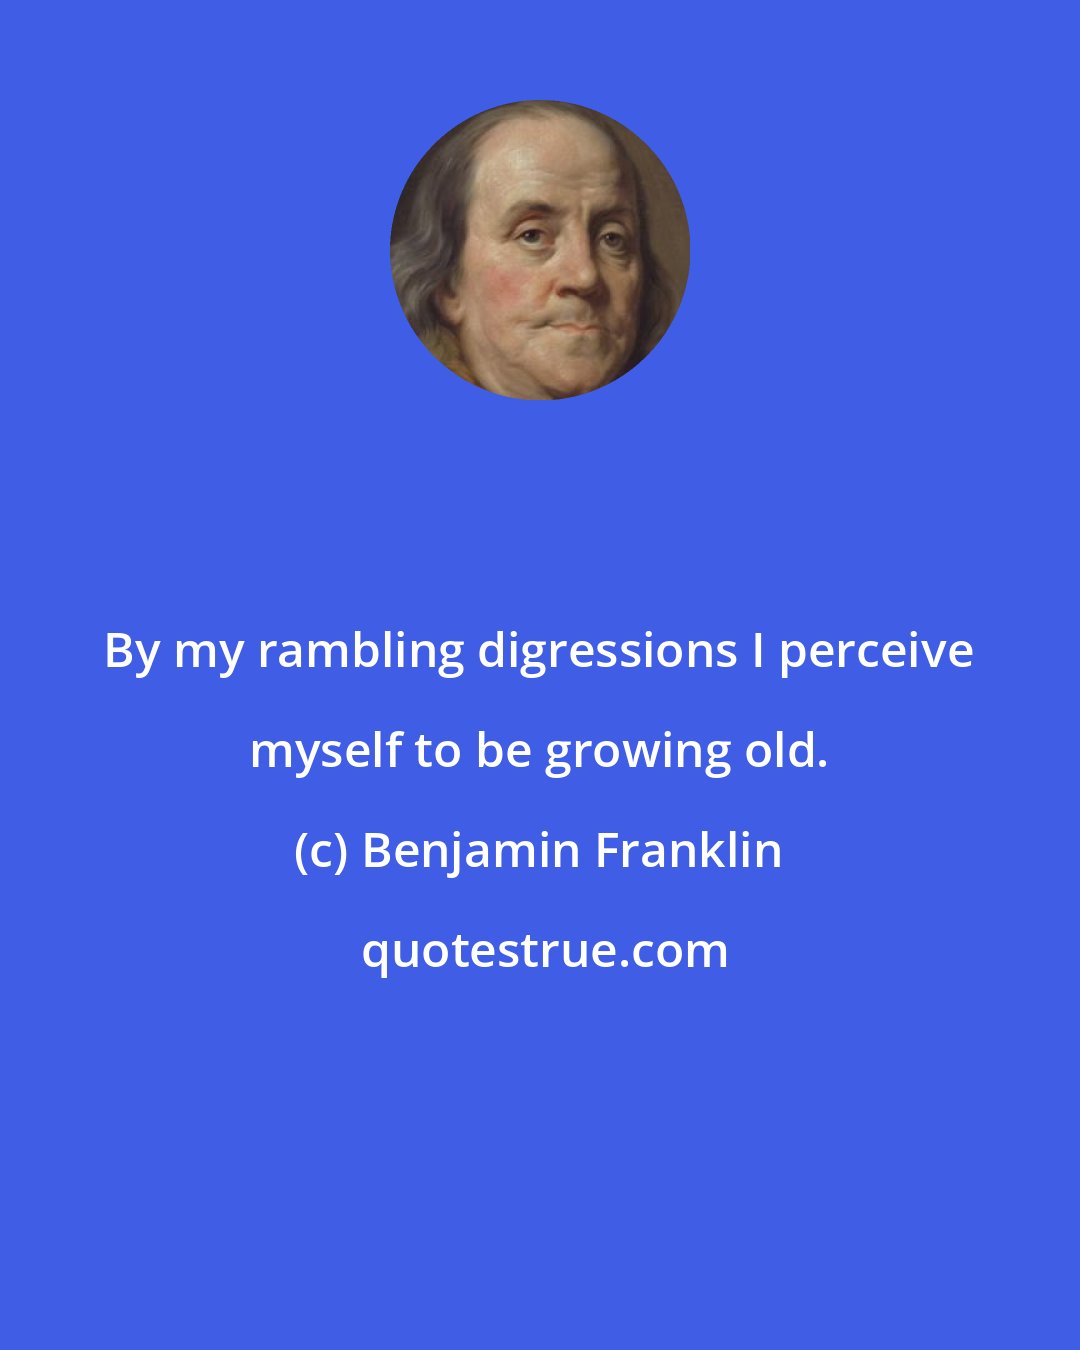 Benjamin Franklin: By my rambling digressions I perceive myself to be growing old.